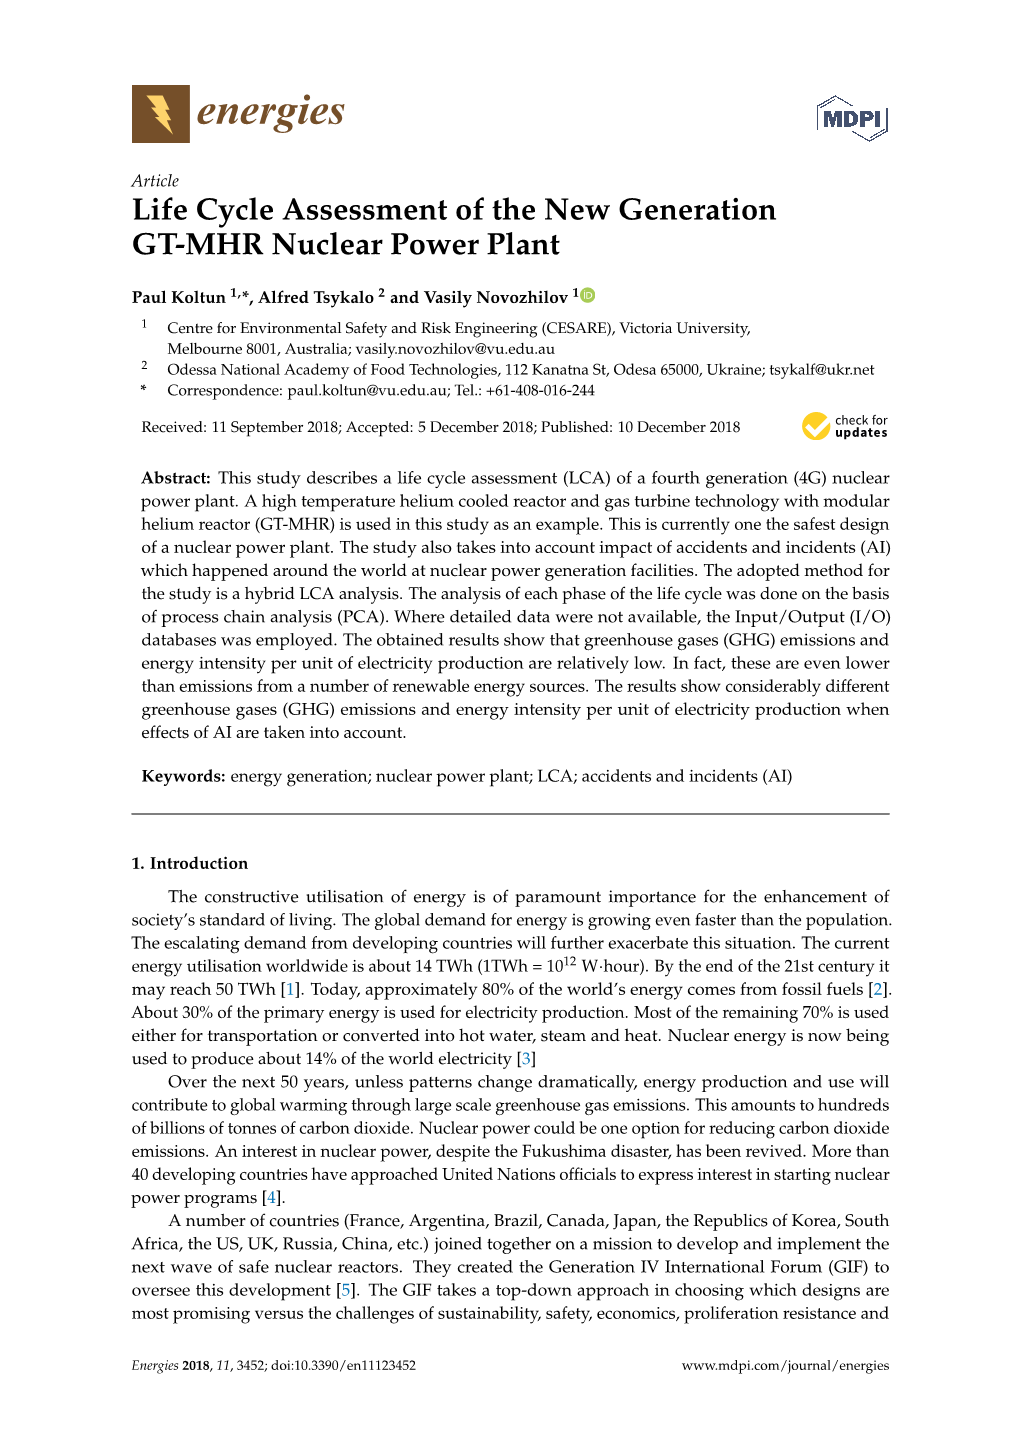 Life Cycle Assessment of the New Generation GT-MHR Nuclear Power Plant